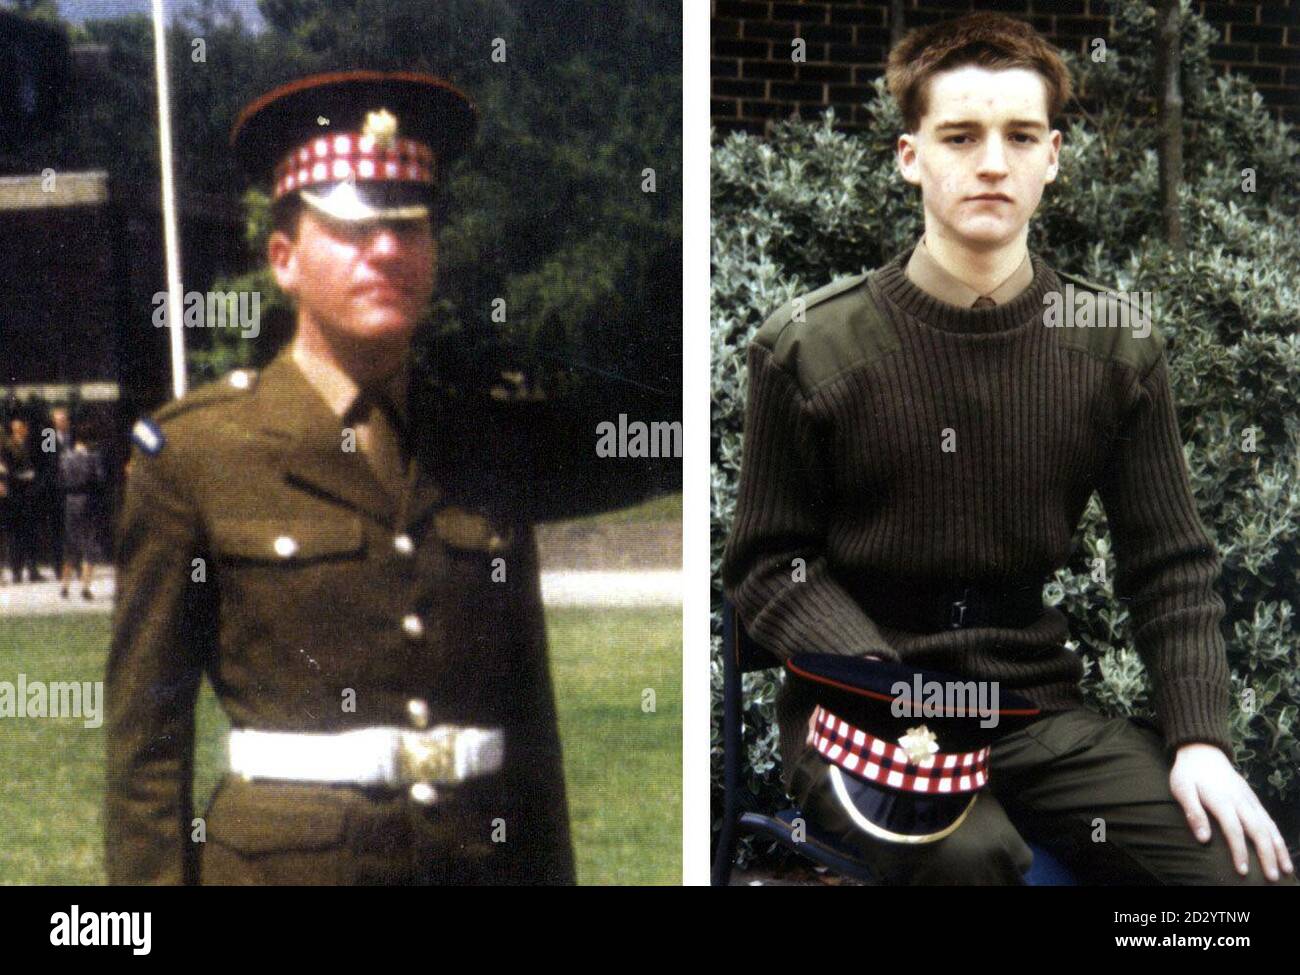 Composite photo's of left, Undated collect photograph of soldier James Fisher, 27, from Ayr who, along with fellow Scots Guardsman, Mark Wright, 22 (right) were jailed for life for killing a Roman Catholic in Belfast : Northern Ireland Secretary Mo Mowlam announced that she had begun a 'further review of the cases of James Fisher and Mark Wright who have been in prison since 1992. In a surprise statement, Ms Mowlam said she had decided to carry out the review in the light of correspondence she had received from the men's solicitors. * 24/11/00: The pair, jailed for the murder of an unarmed te Stock Photo